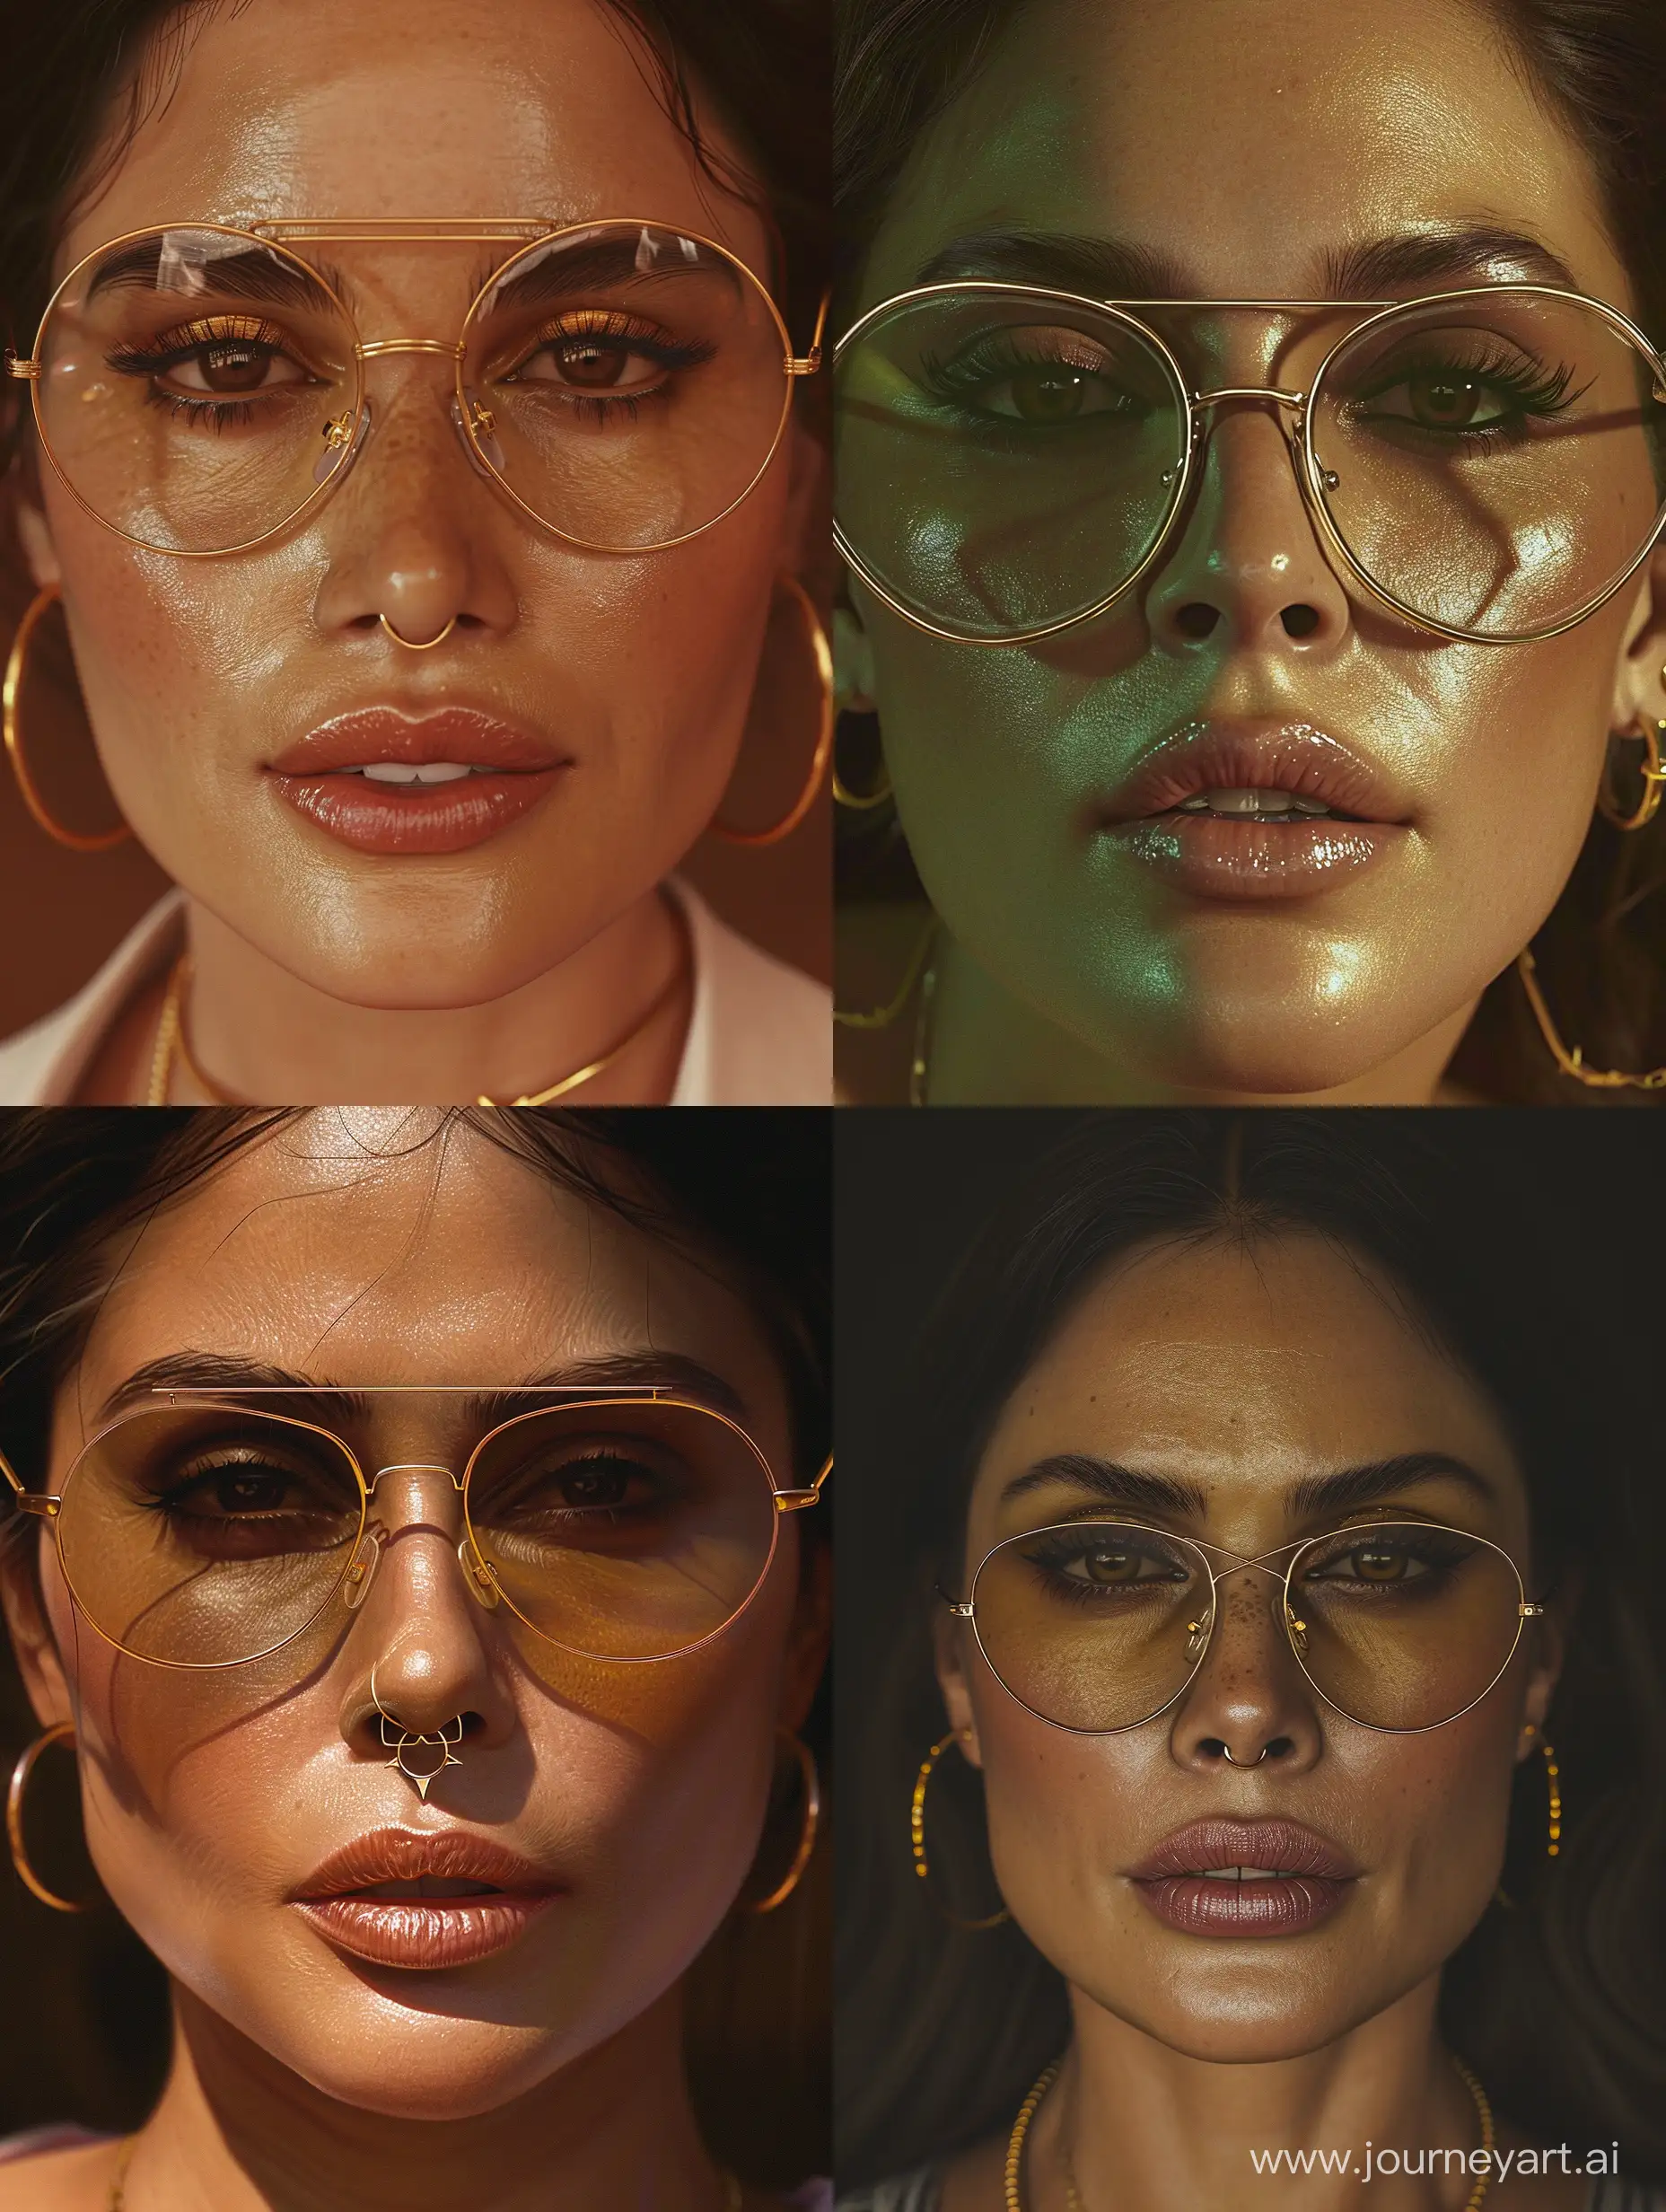 Salma Hayek with Olive Skin and a hooked nose wearing thin round wireframe glasses. wearing gold hoop earrings. wearing a small star of david necklace. hyperrealistic. 